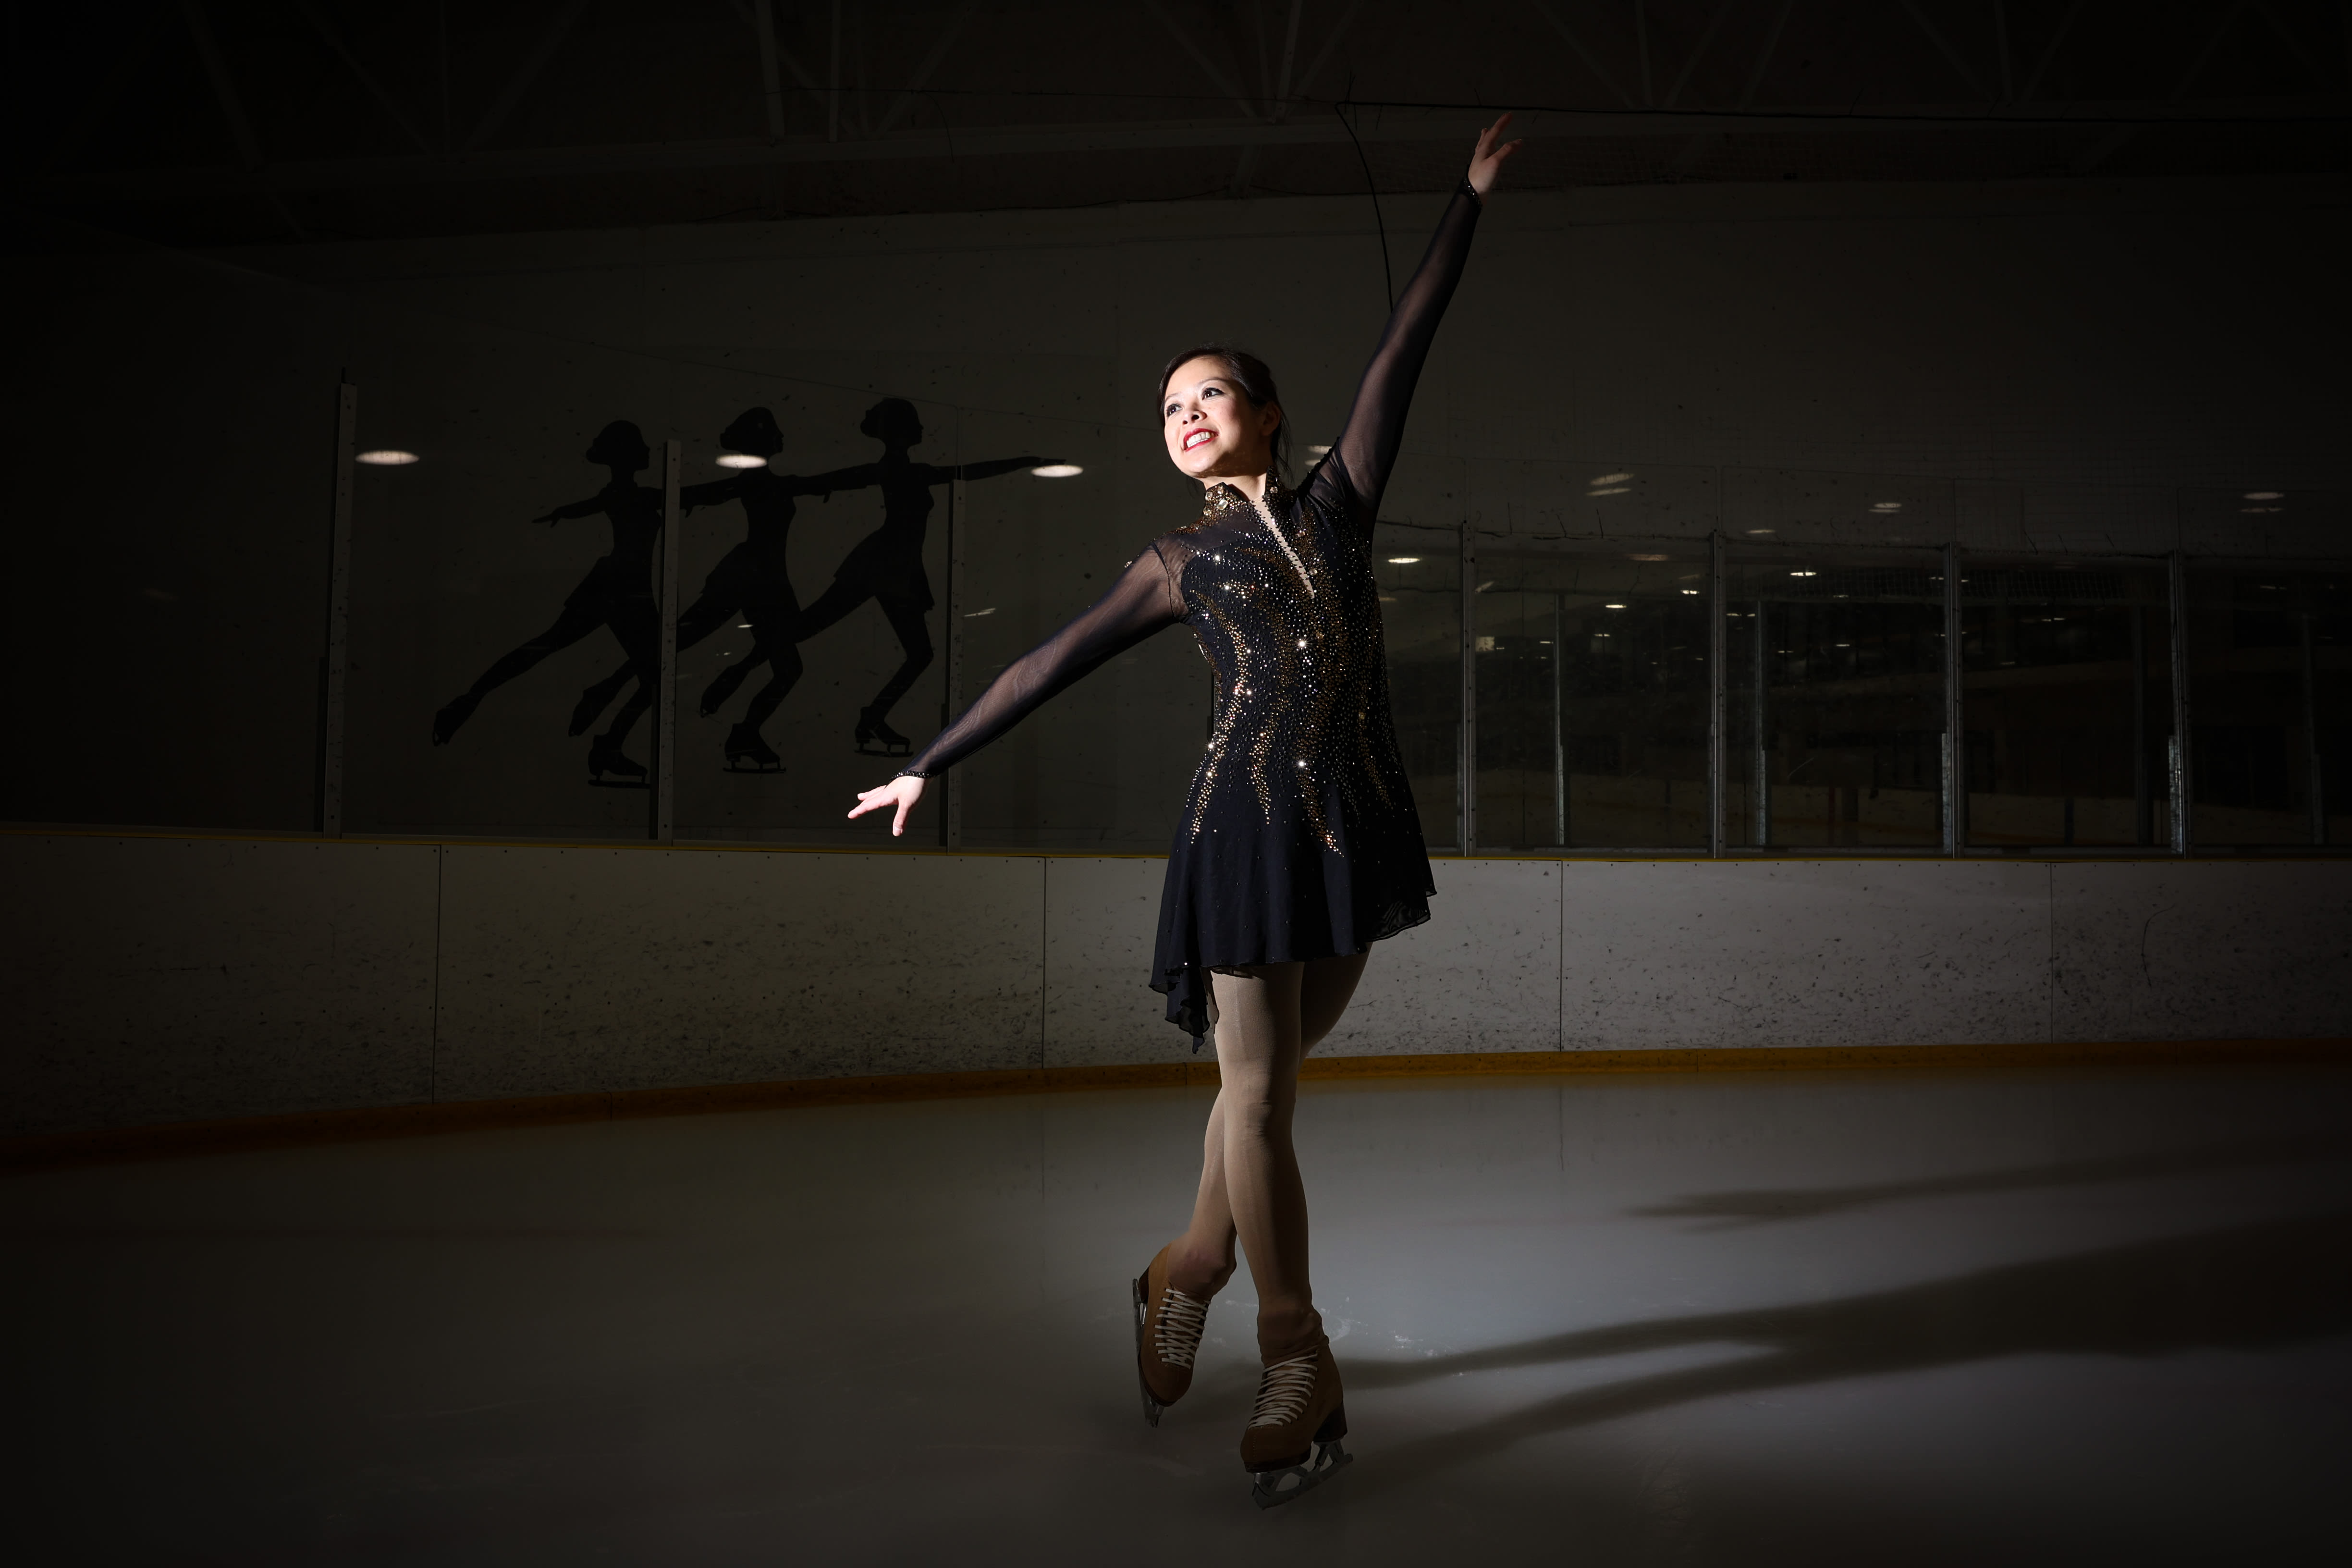 Rochester woman's rekindled love for figure skating leads to U.S. championship